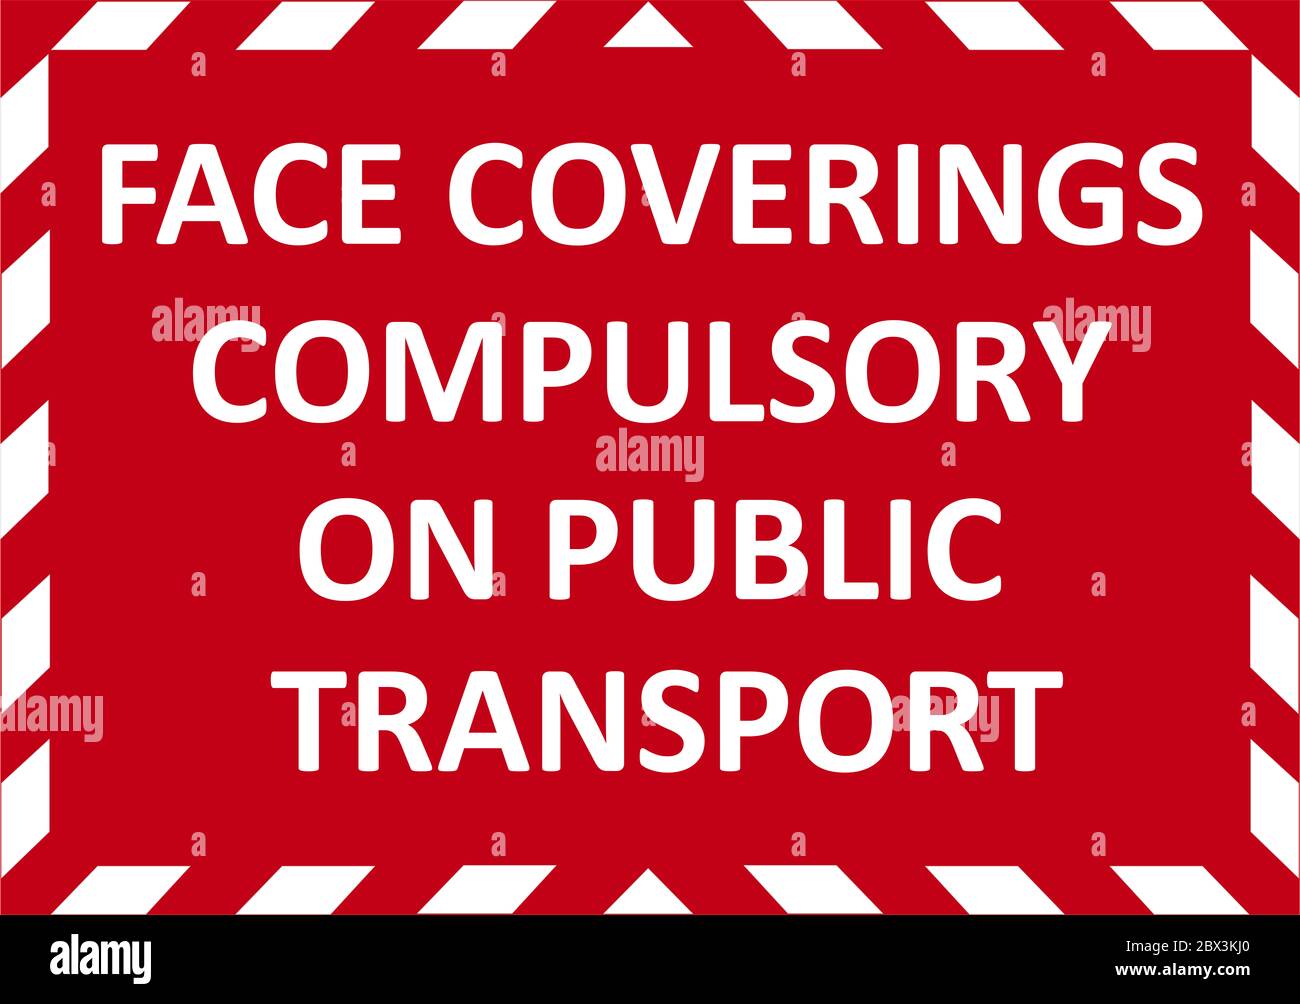 FACE COVERINGS COMPULSORY ON PUBLIC TRANSPORT warning sign. Red quarantine sign that help to battle against Covid-19 in the United Kingdom. Illustrati Stock Photo